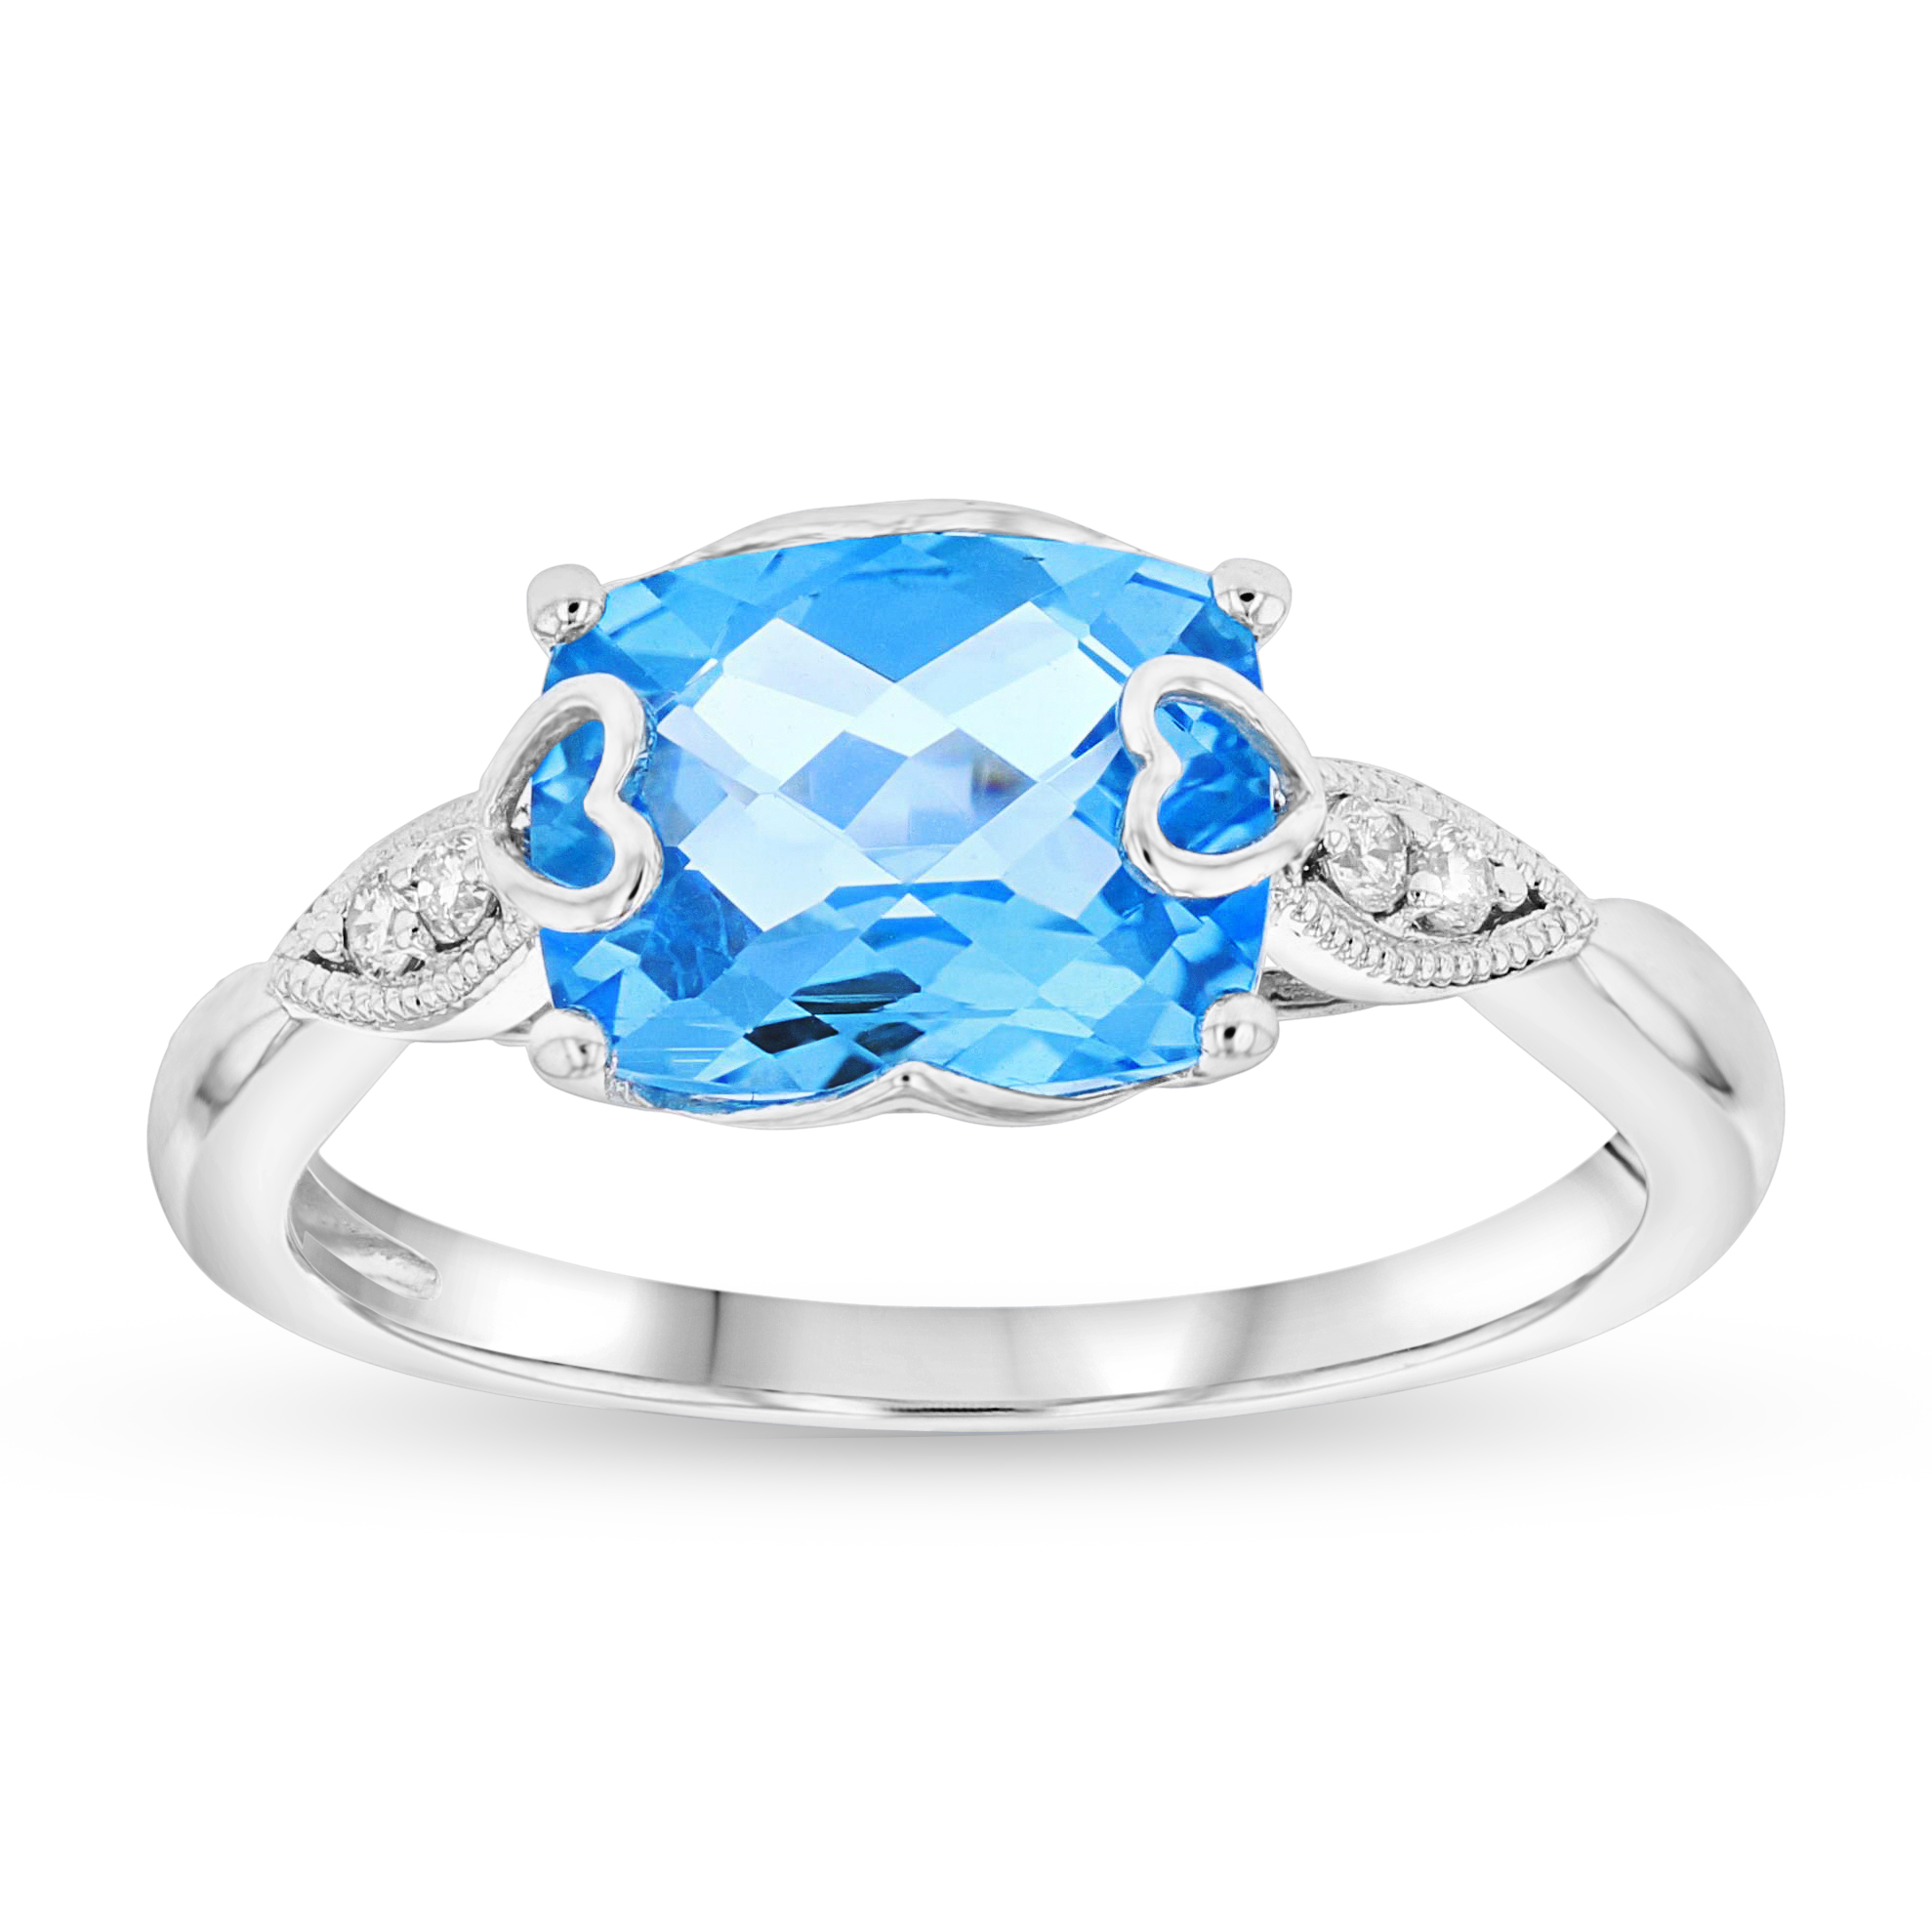 View 2.46ctw Blue Topaz and Diamond Ring in 14k White Gold